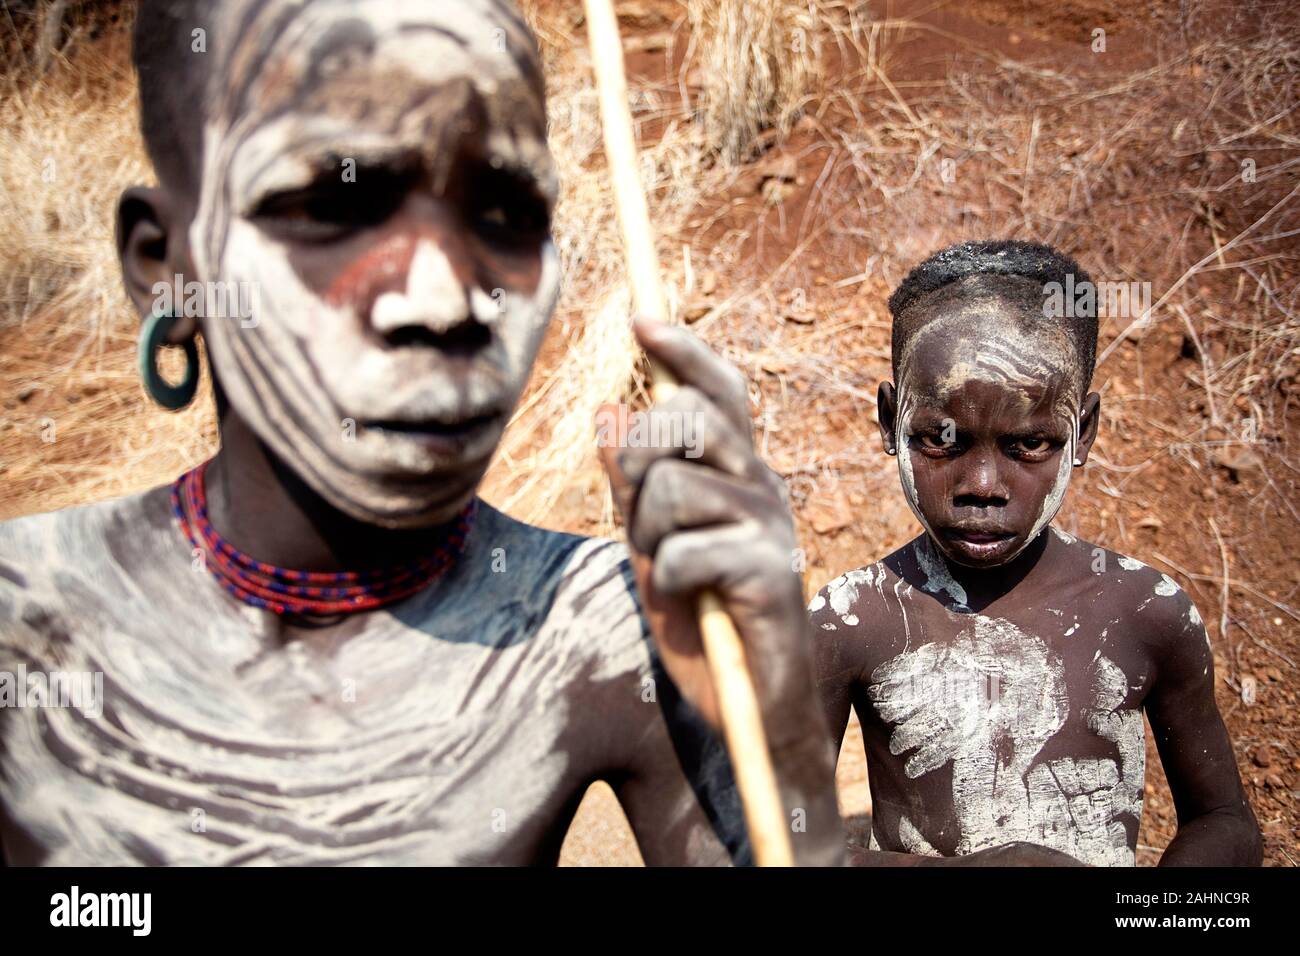 Ethiopia, south omo valley, mursi tribe, young boys with